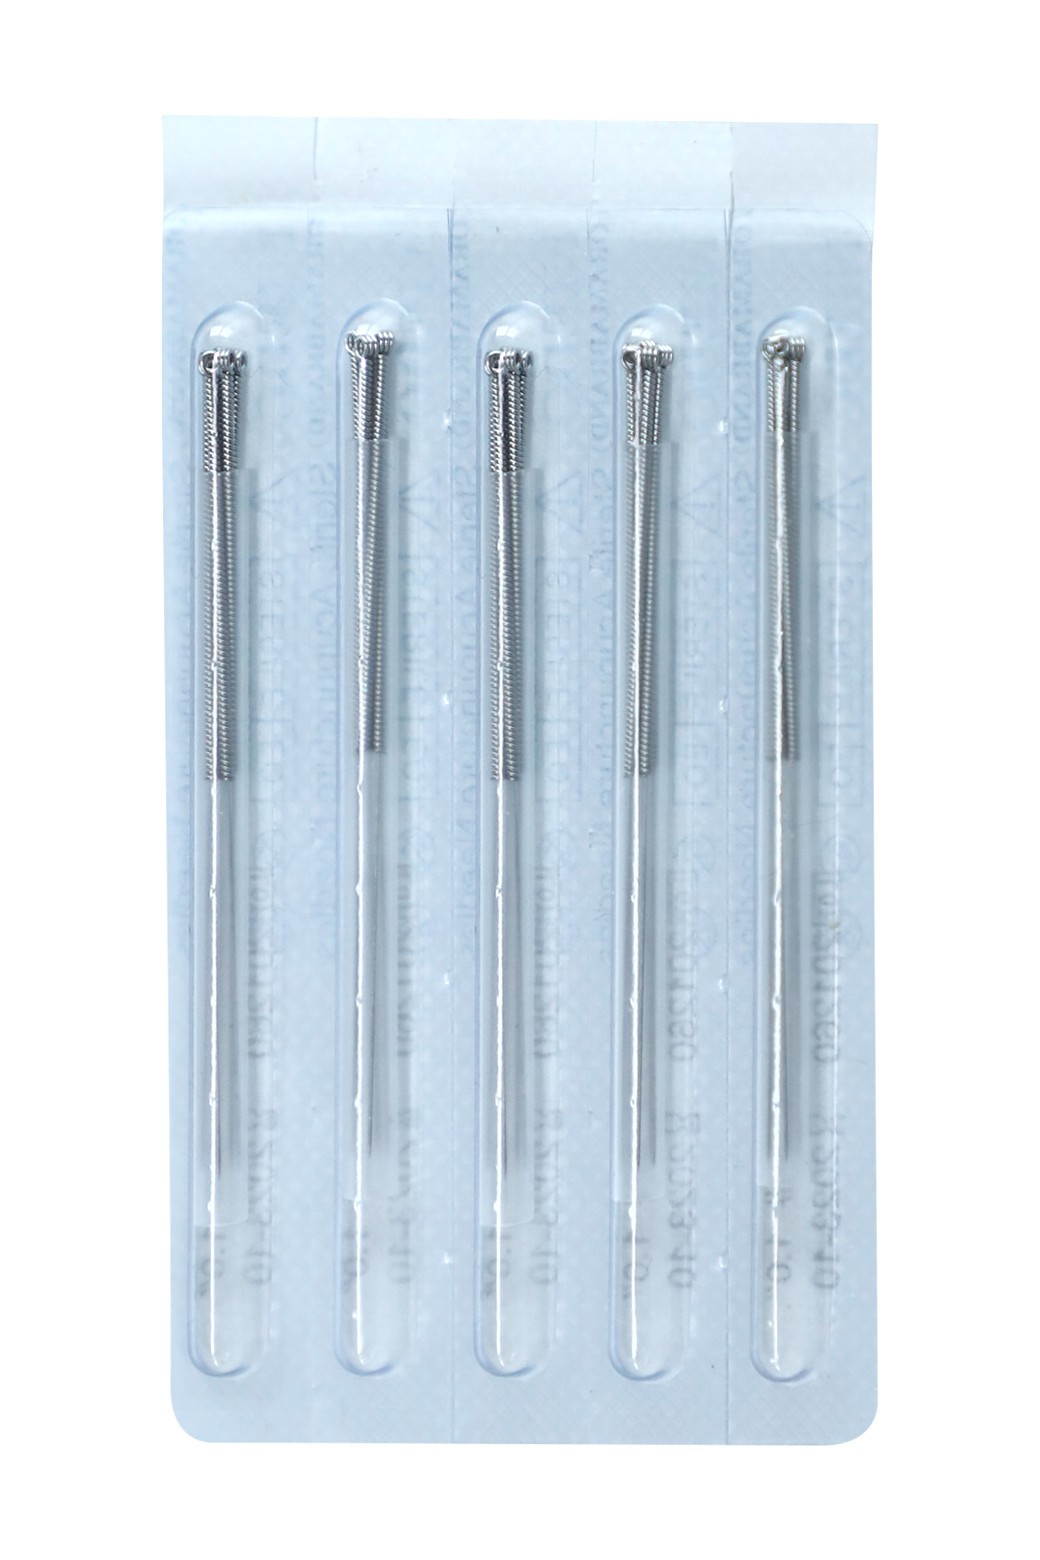 .18x25mm - Alpha Cluster Acupuncture Needle